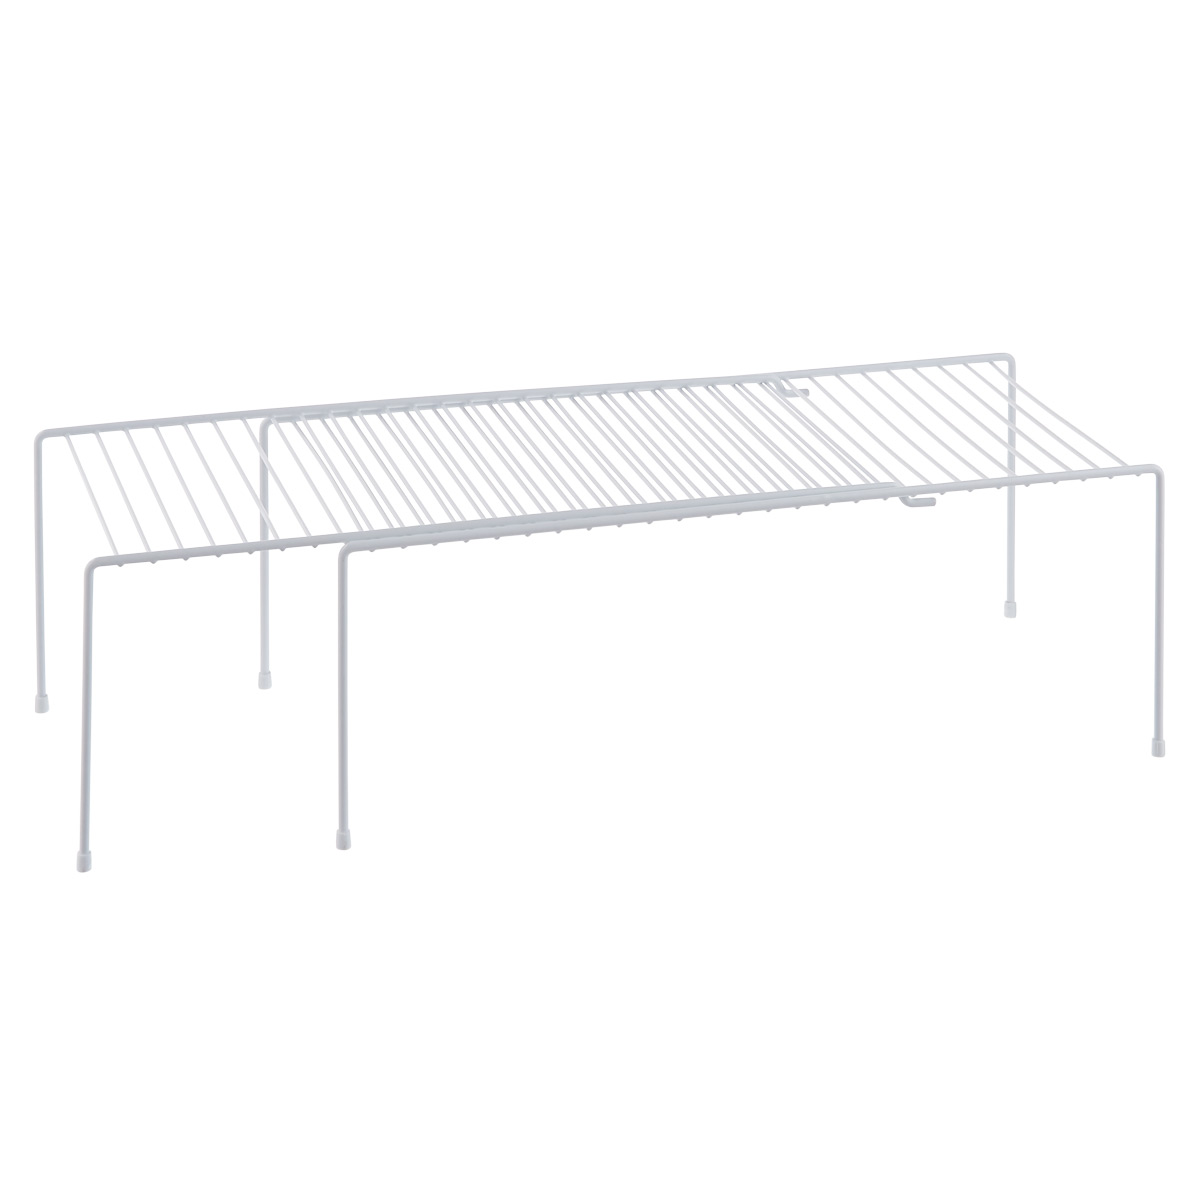 https://www.containerstore.com/catalogimages/413089/10077509_expandable_closet_shelf_whi.jpg